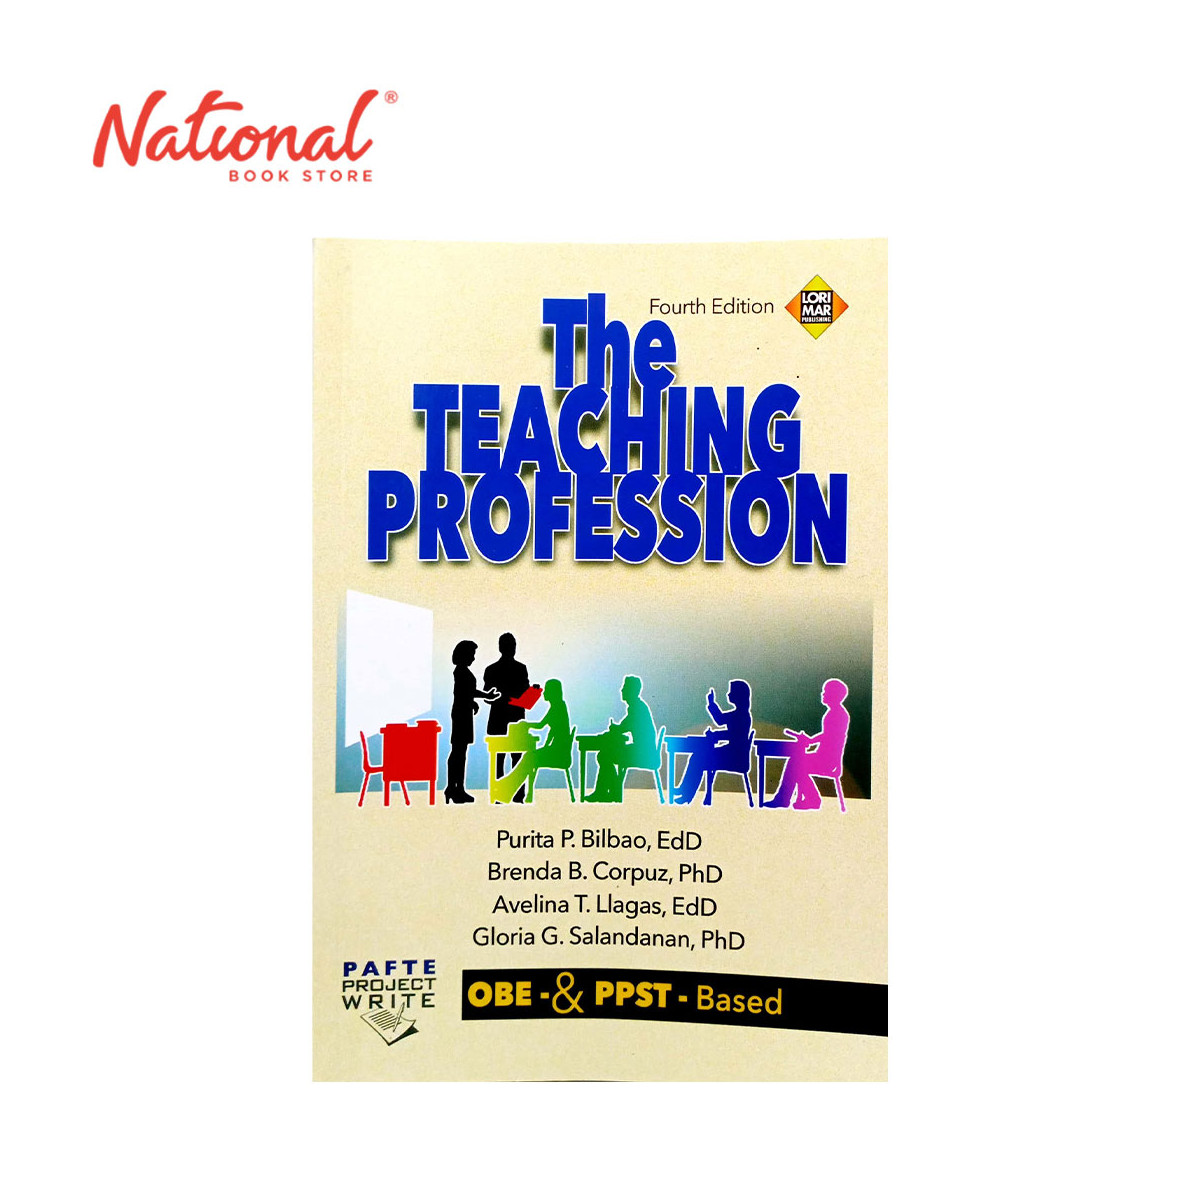 The Teaching Profession, 4th Edition by Purita Bilbao, et. al - Trade Paperback - College Textbooks